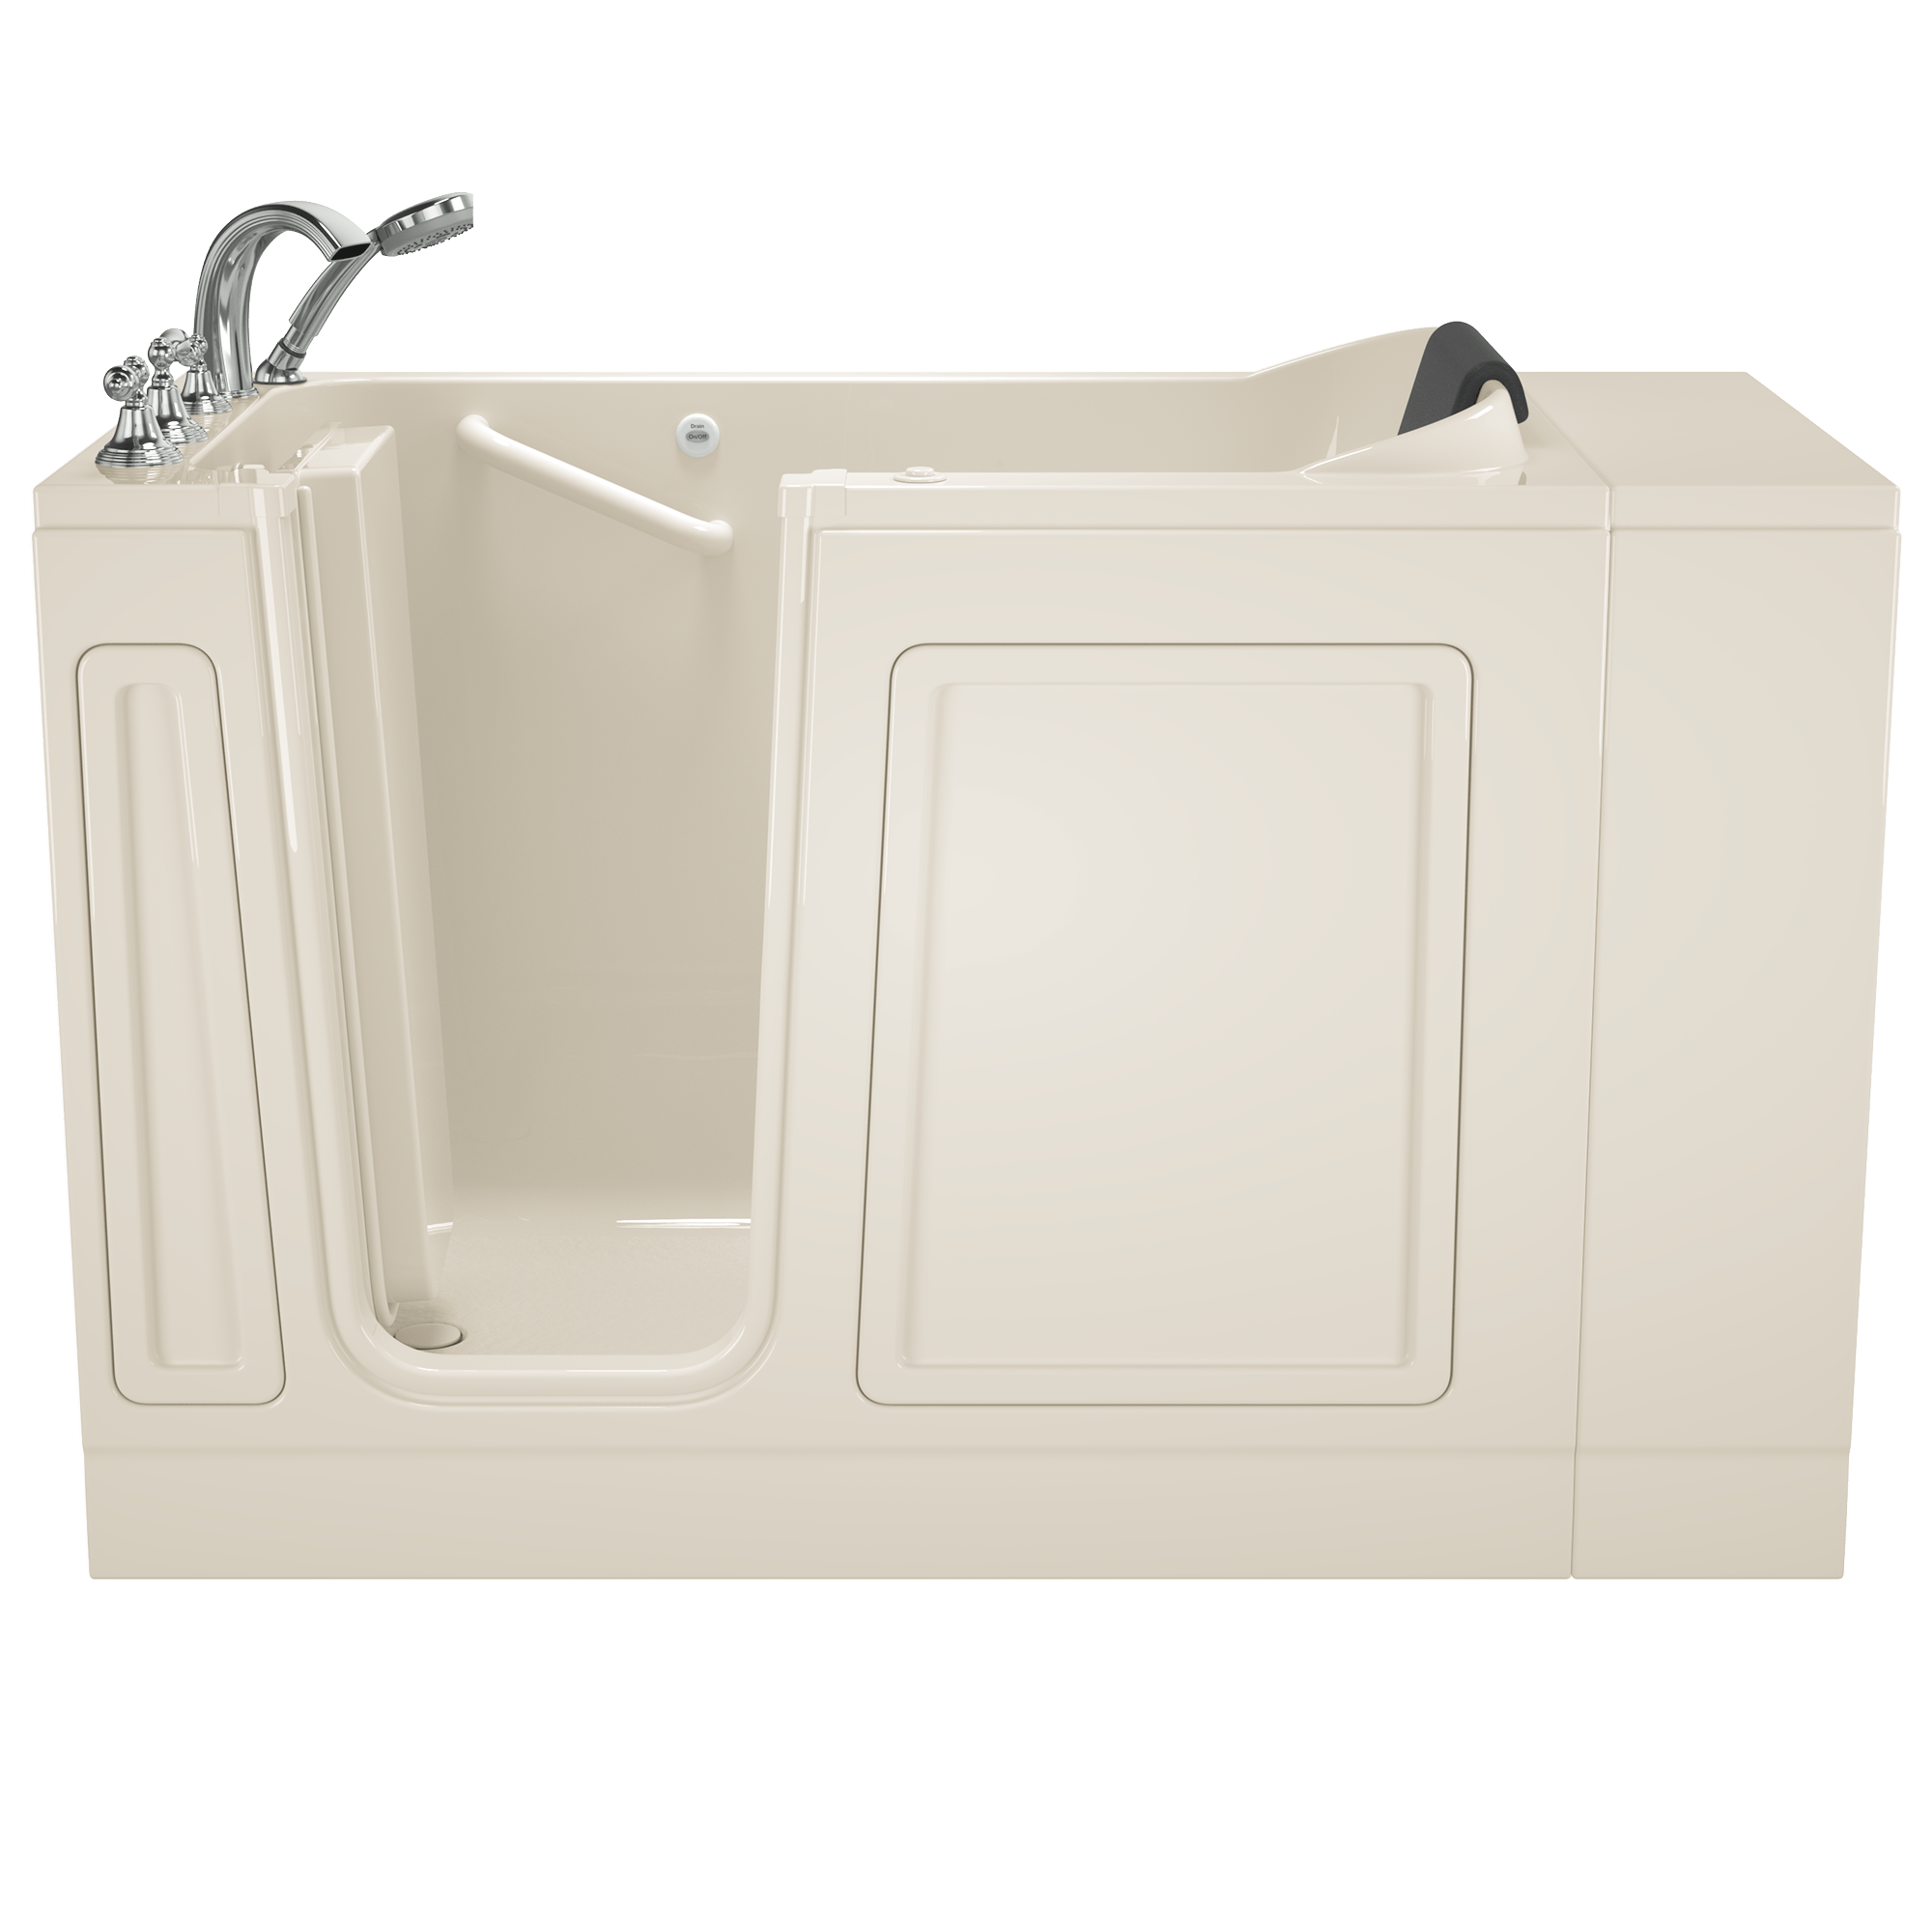 Acrylic Luxury Series 28 x 48-Inch Walk-in Tub With Air Spa System - Left-Hand Drain With Faucet